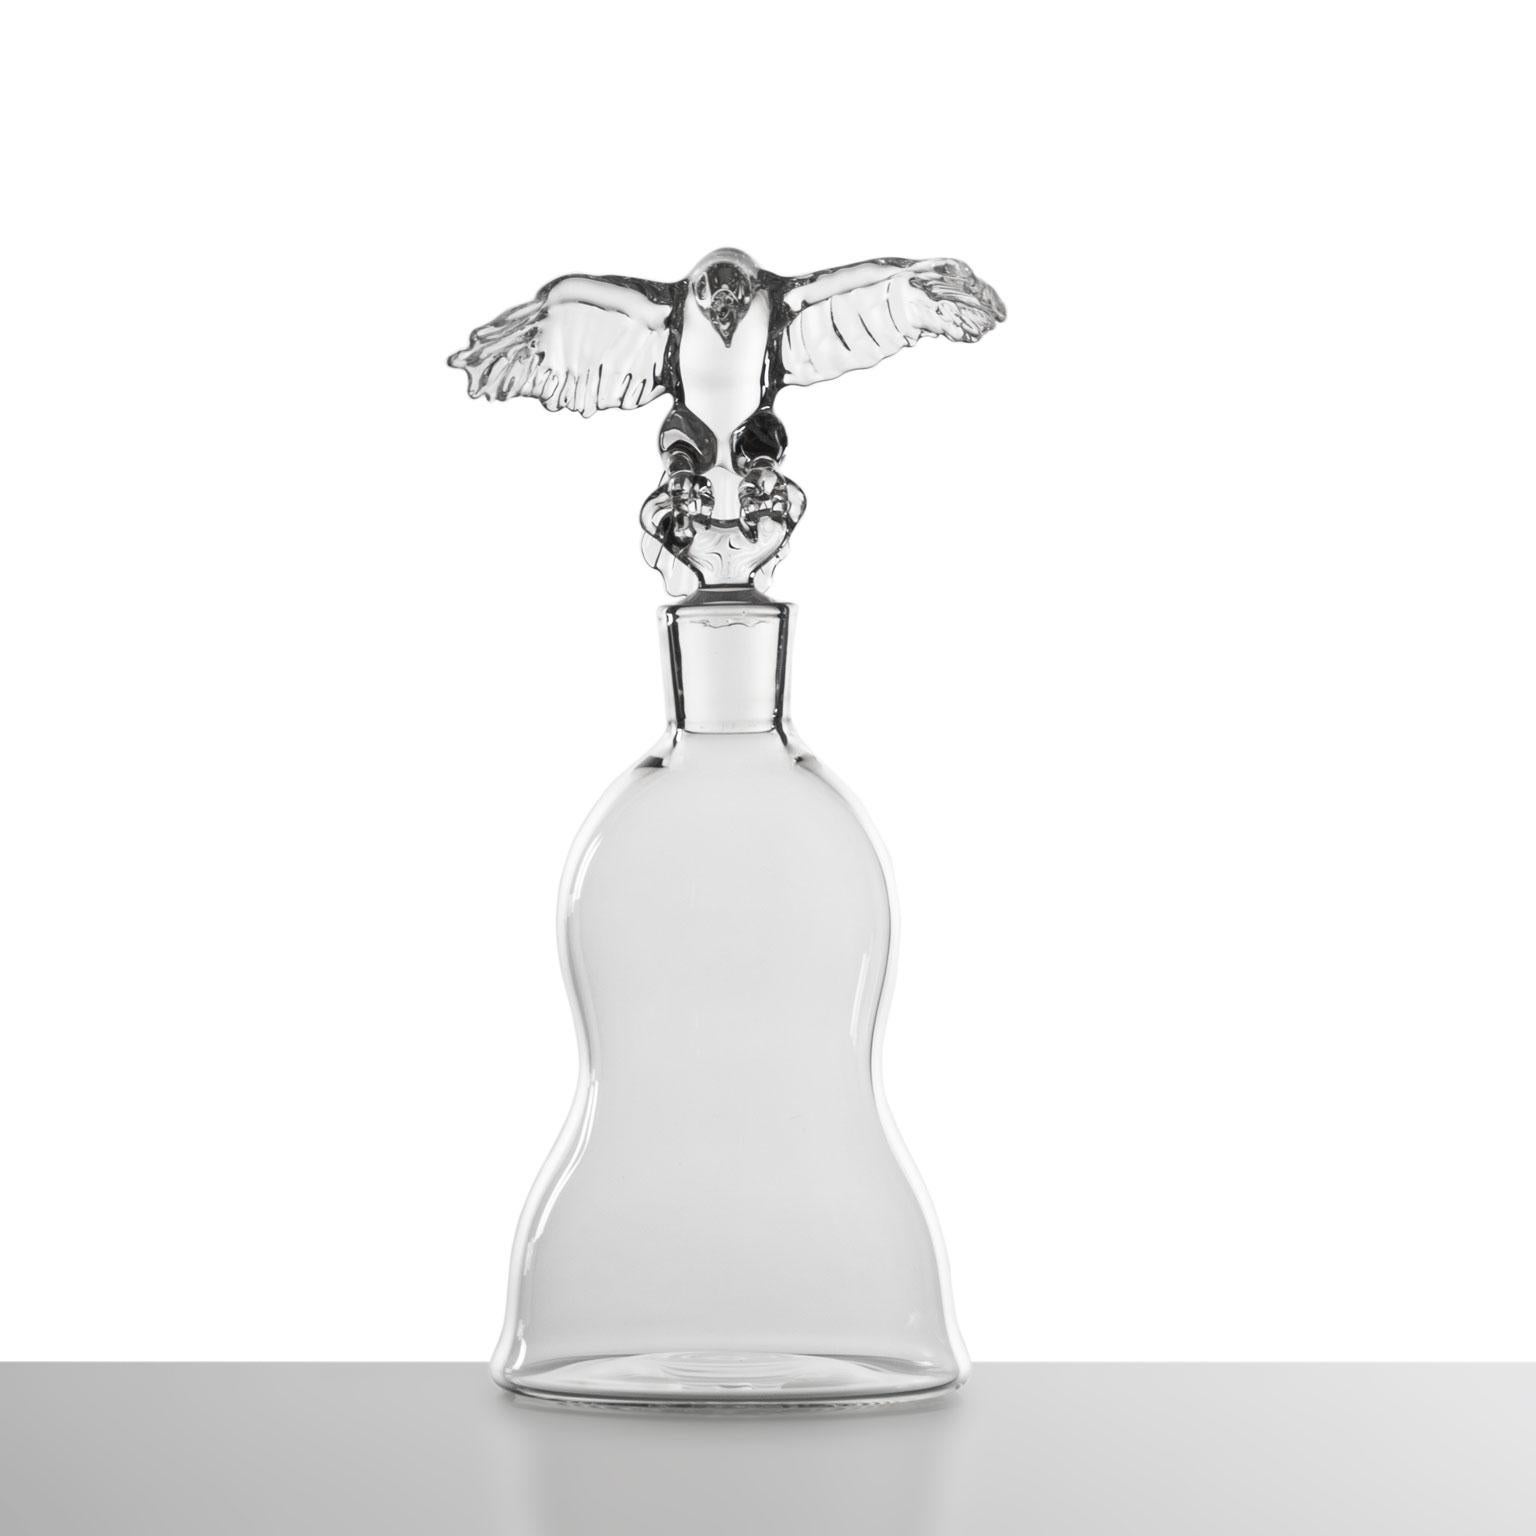 'Eagle Bottle'
A hand-blown glass bottle by Simone Crestani.

The queen of the sky, majestic and wise, spreads her wings, ready to fly where no one ever reaches. The enchantment of her movements are captured in this bottle in the exact instant